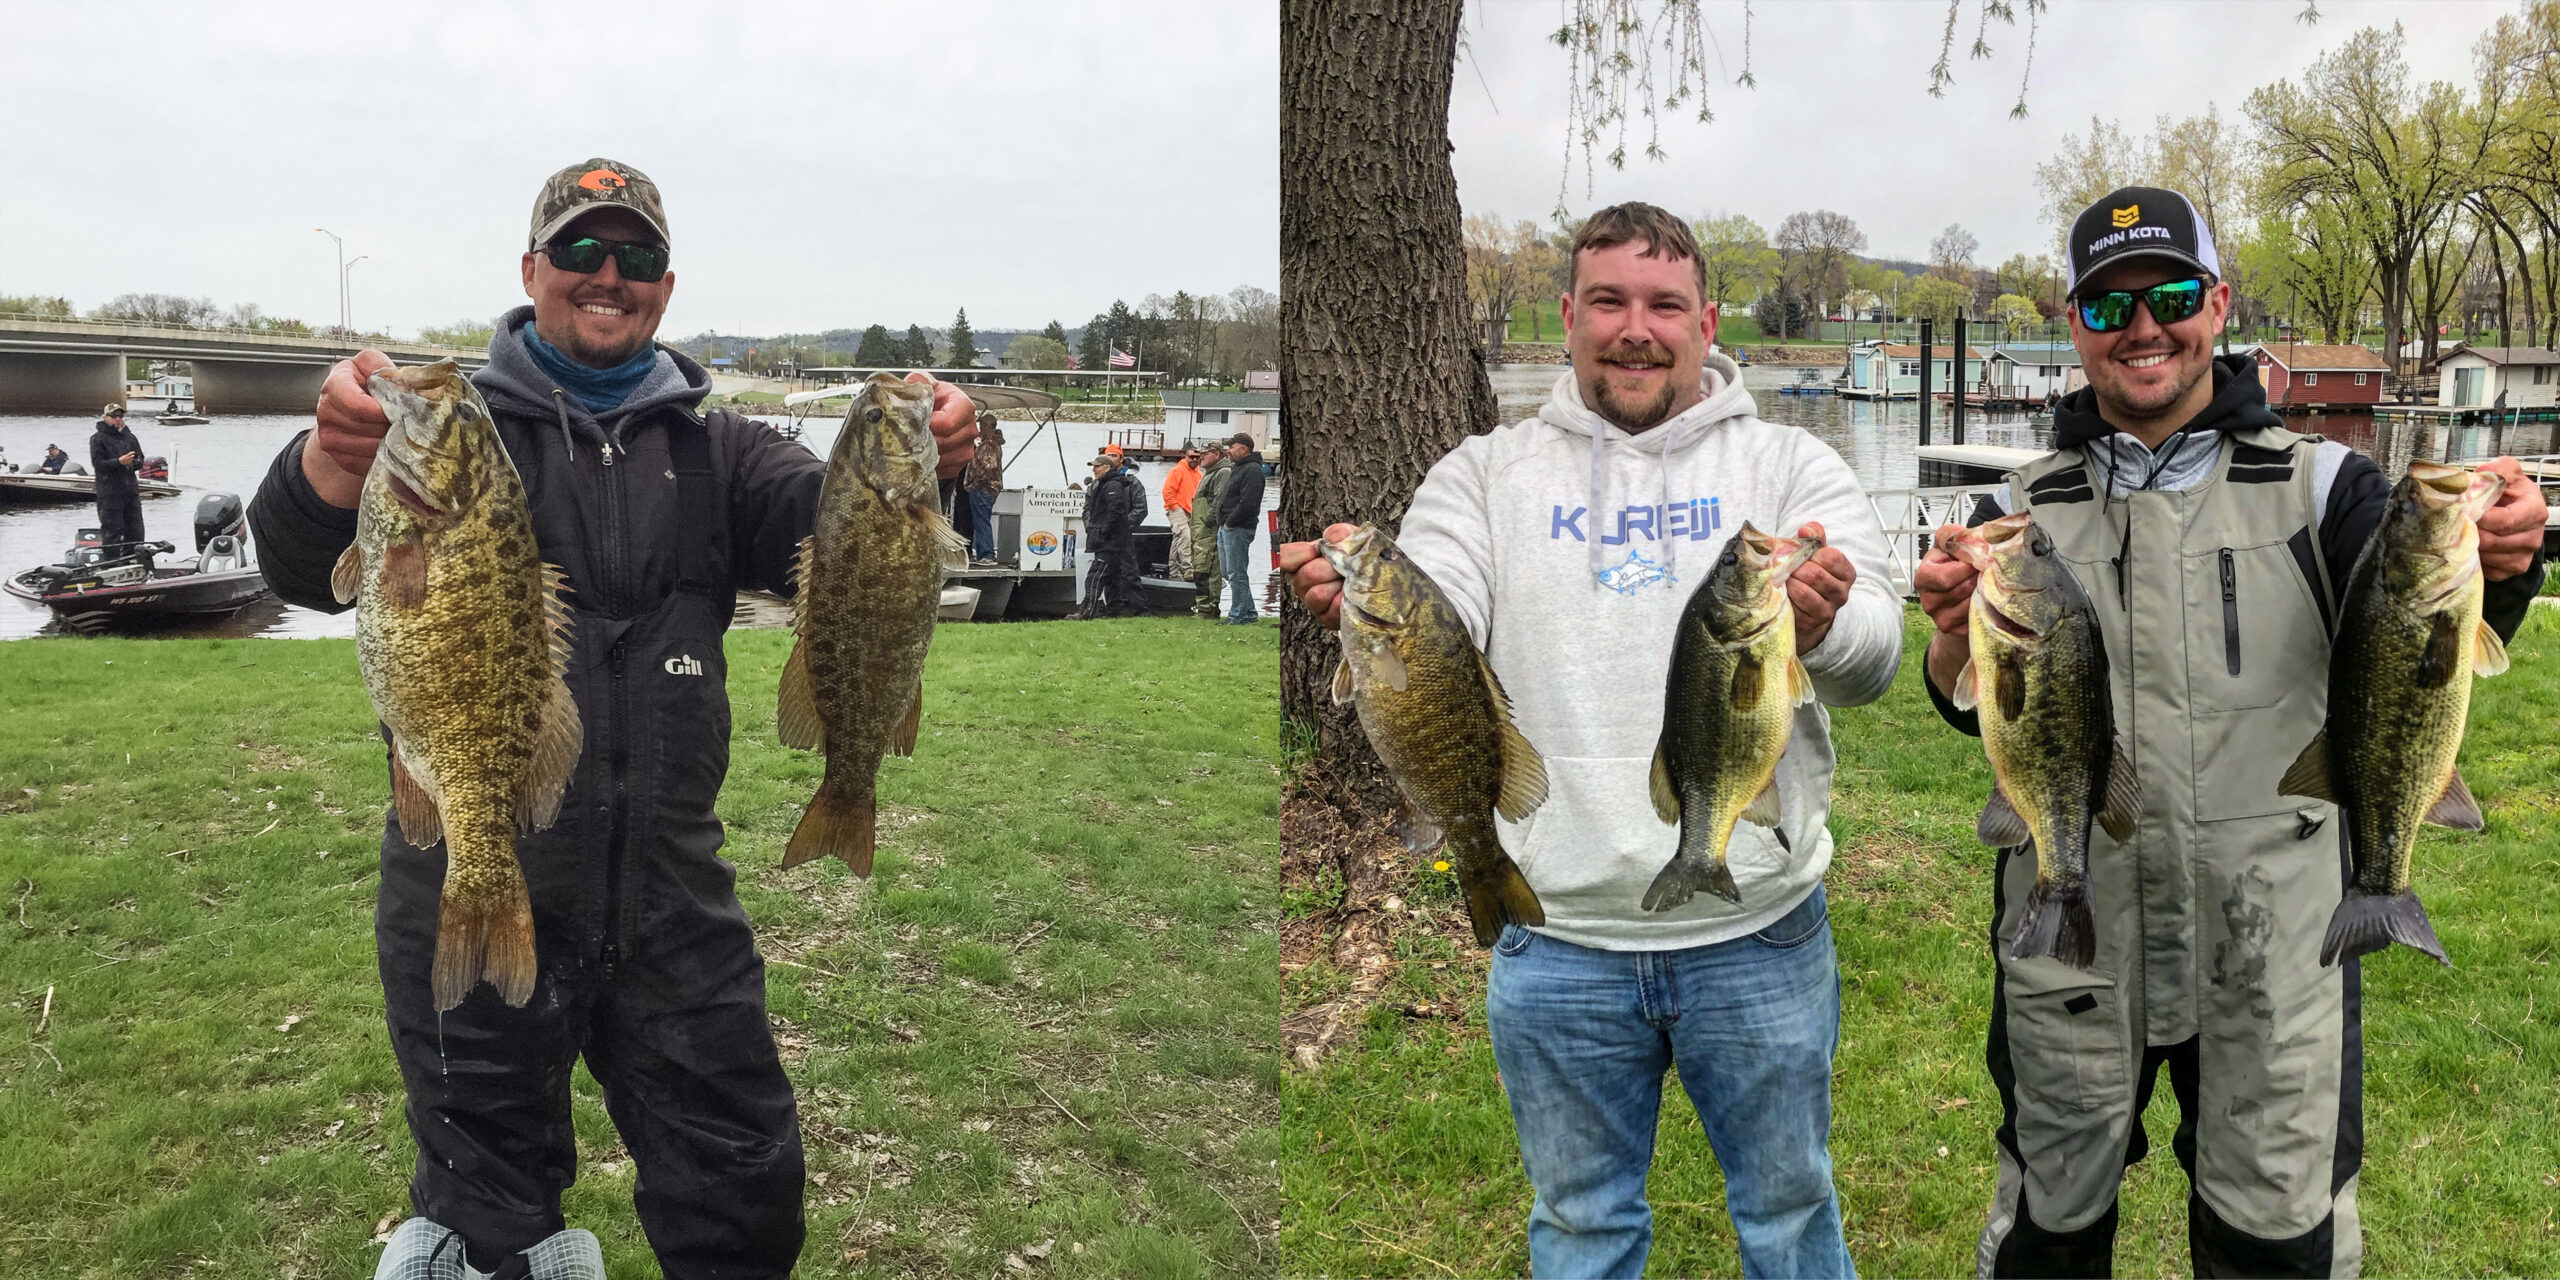 Umbrella Rigs for Great Lakes Smallies - Major League Fishing